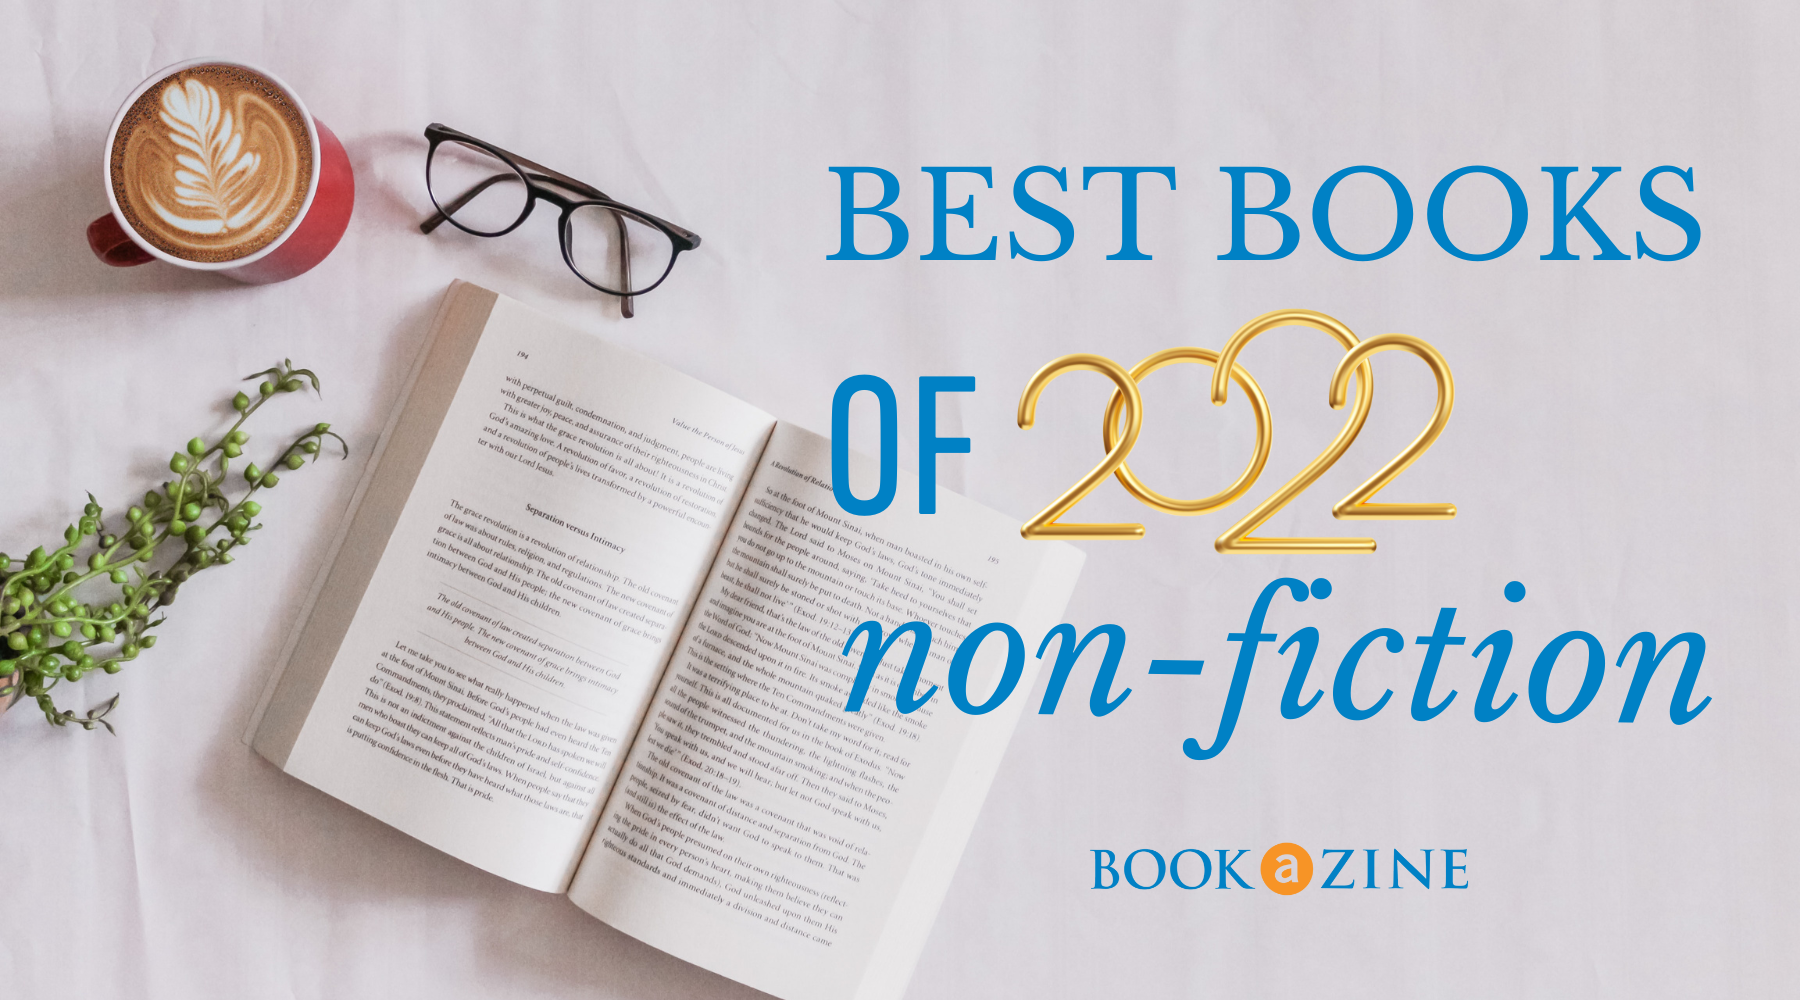 Best Non-Fiction Books of 2022